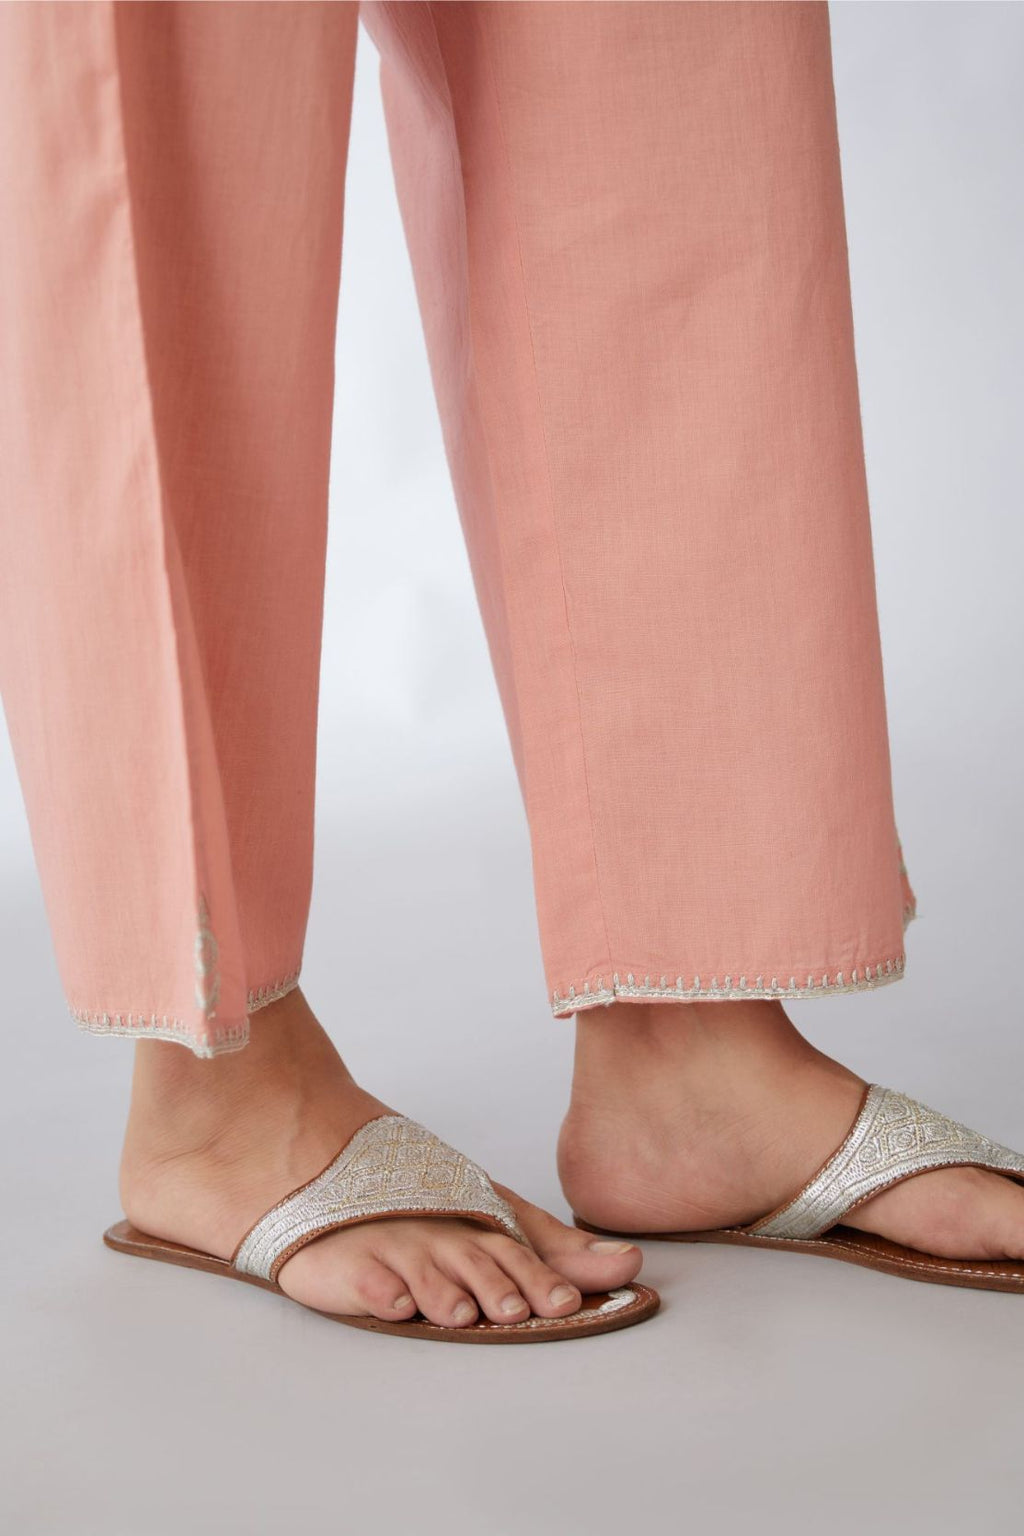 Salmon cotton straight pants with silver embroidery detailing at bottom hem (Pants)